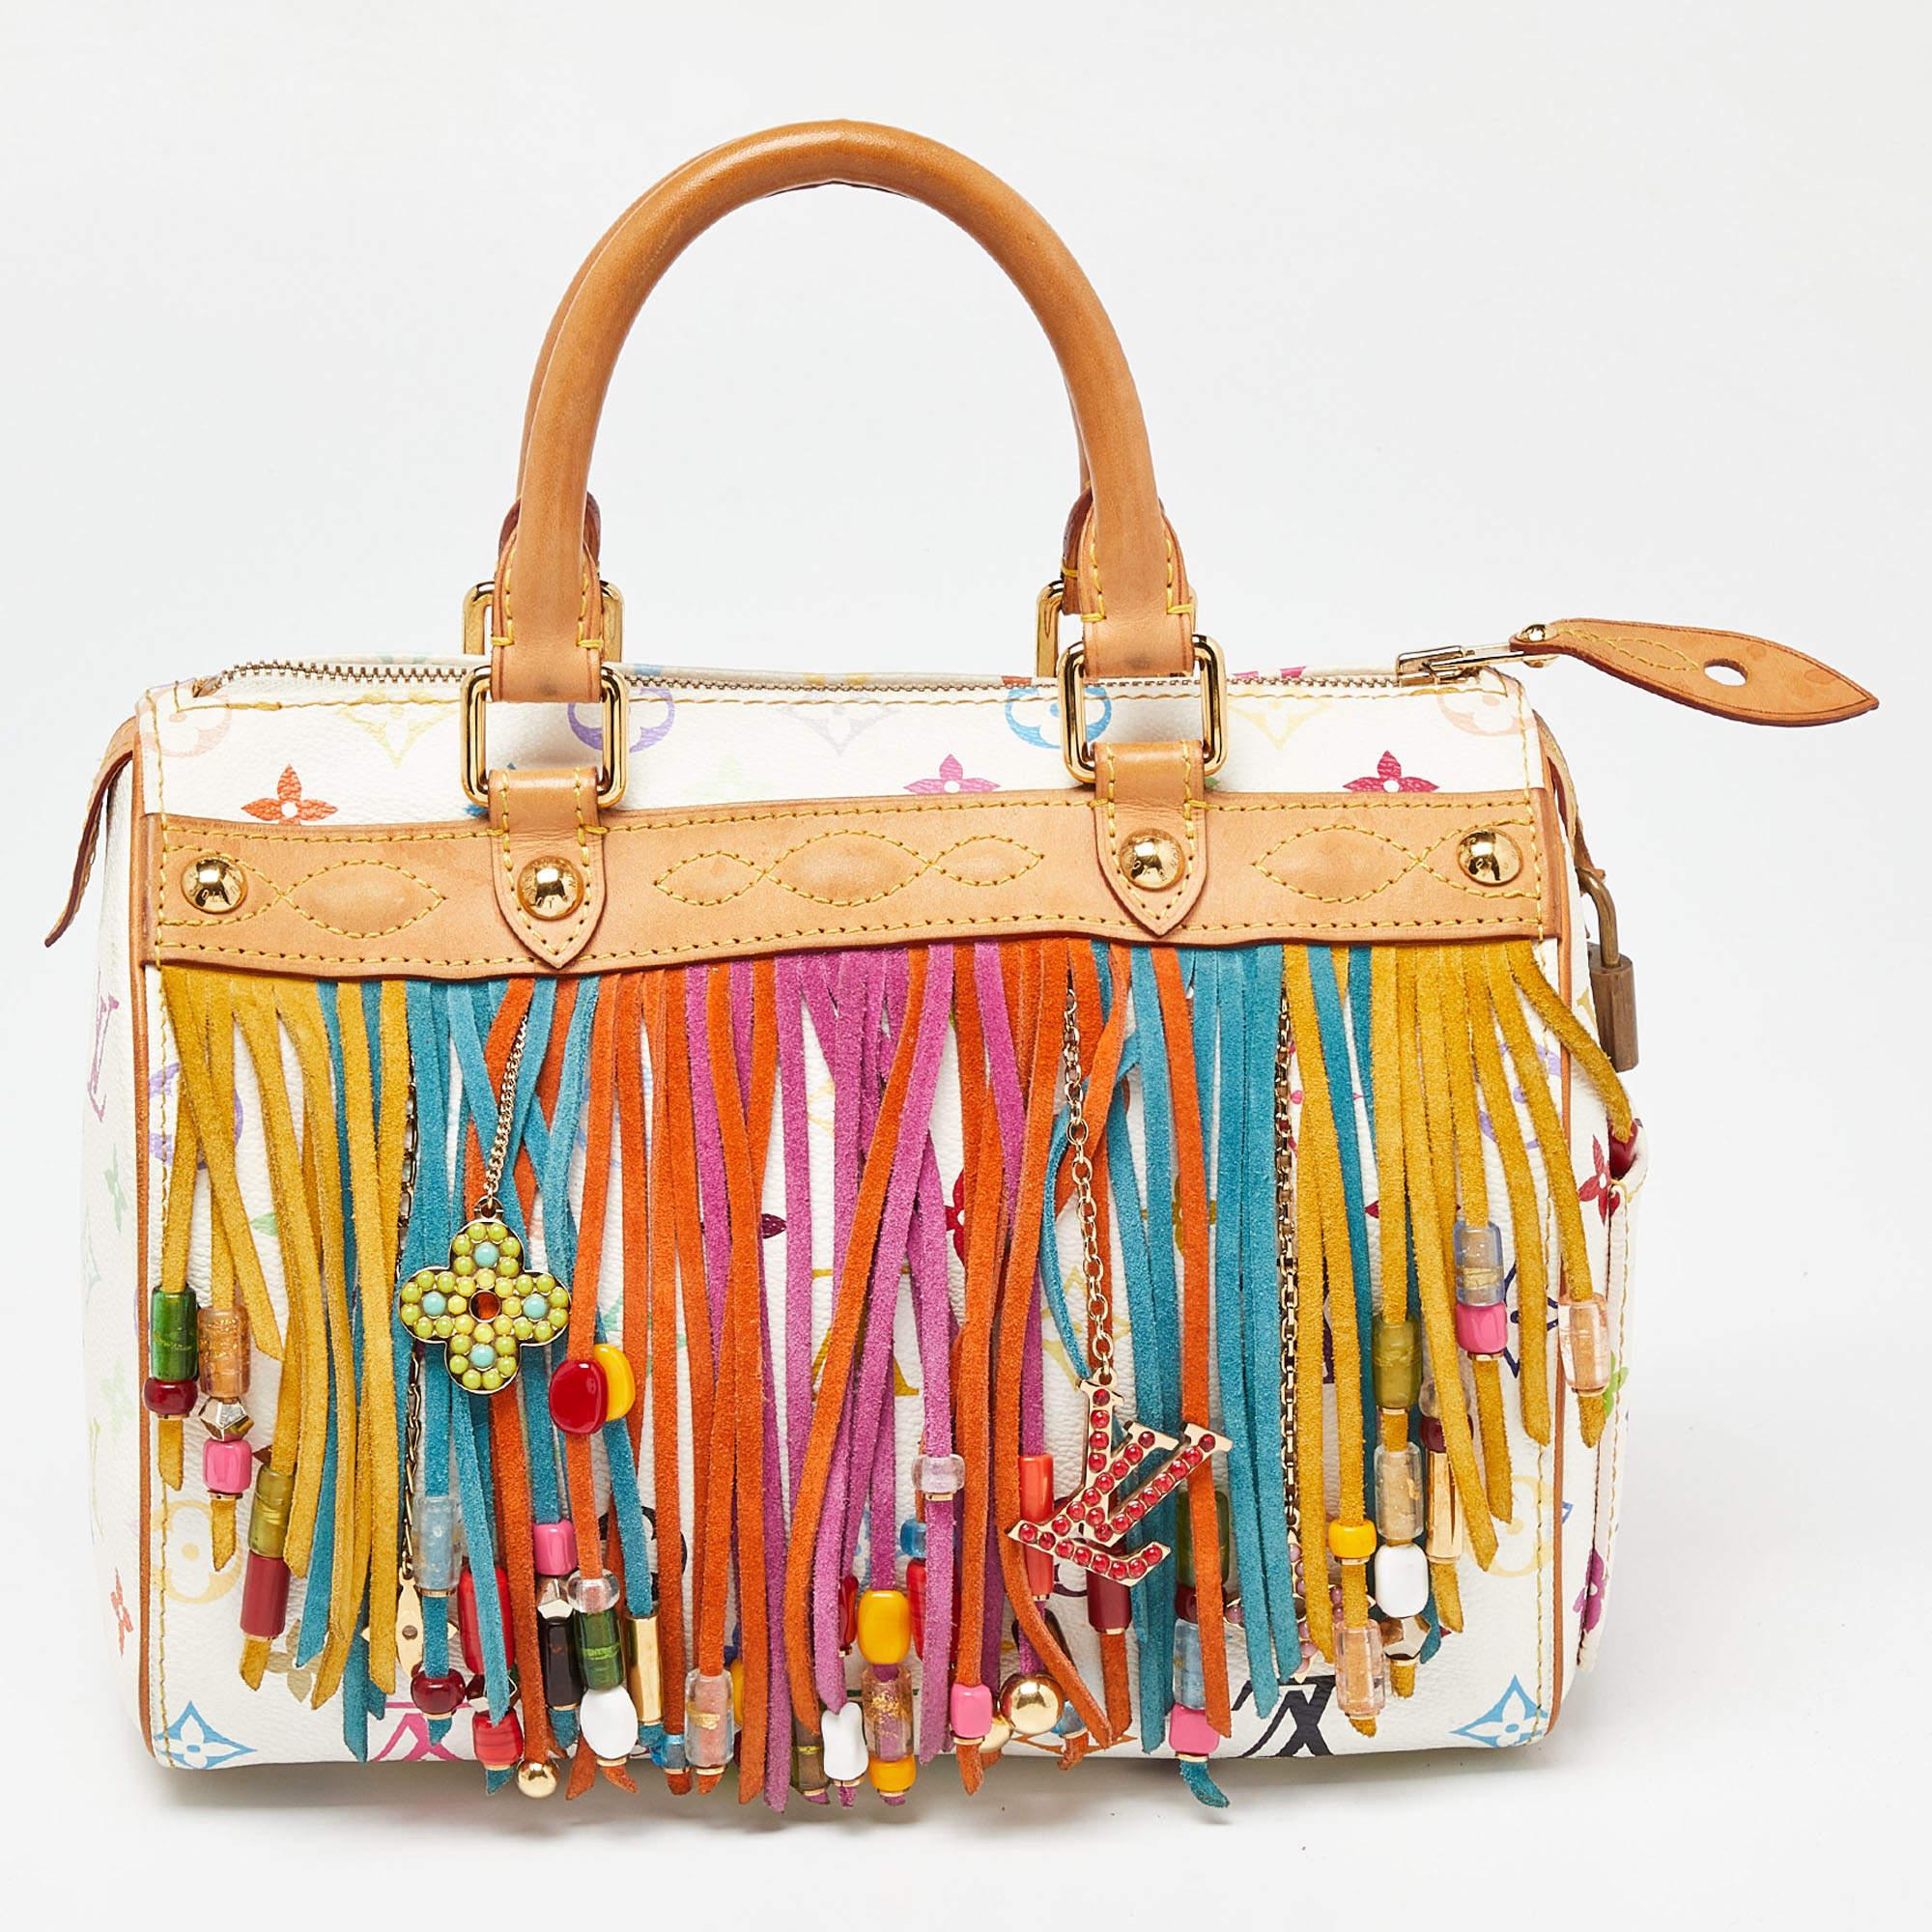 A limited edition bag from LV, this Fringe Speedy 25 is vibrant and features plenty of color drama. The body features a colorful Monogram Multicolore canvas exterior and the cheerful piece is accessorized with gorgeous multi-hued beads and monogram